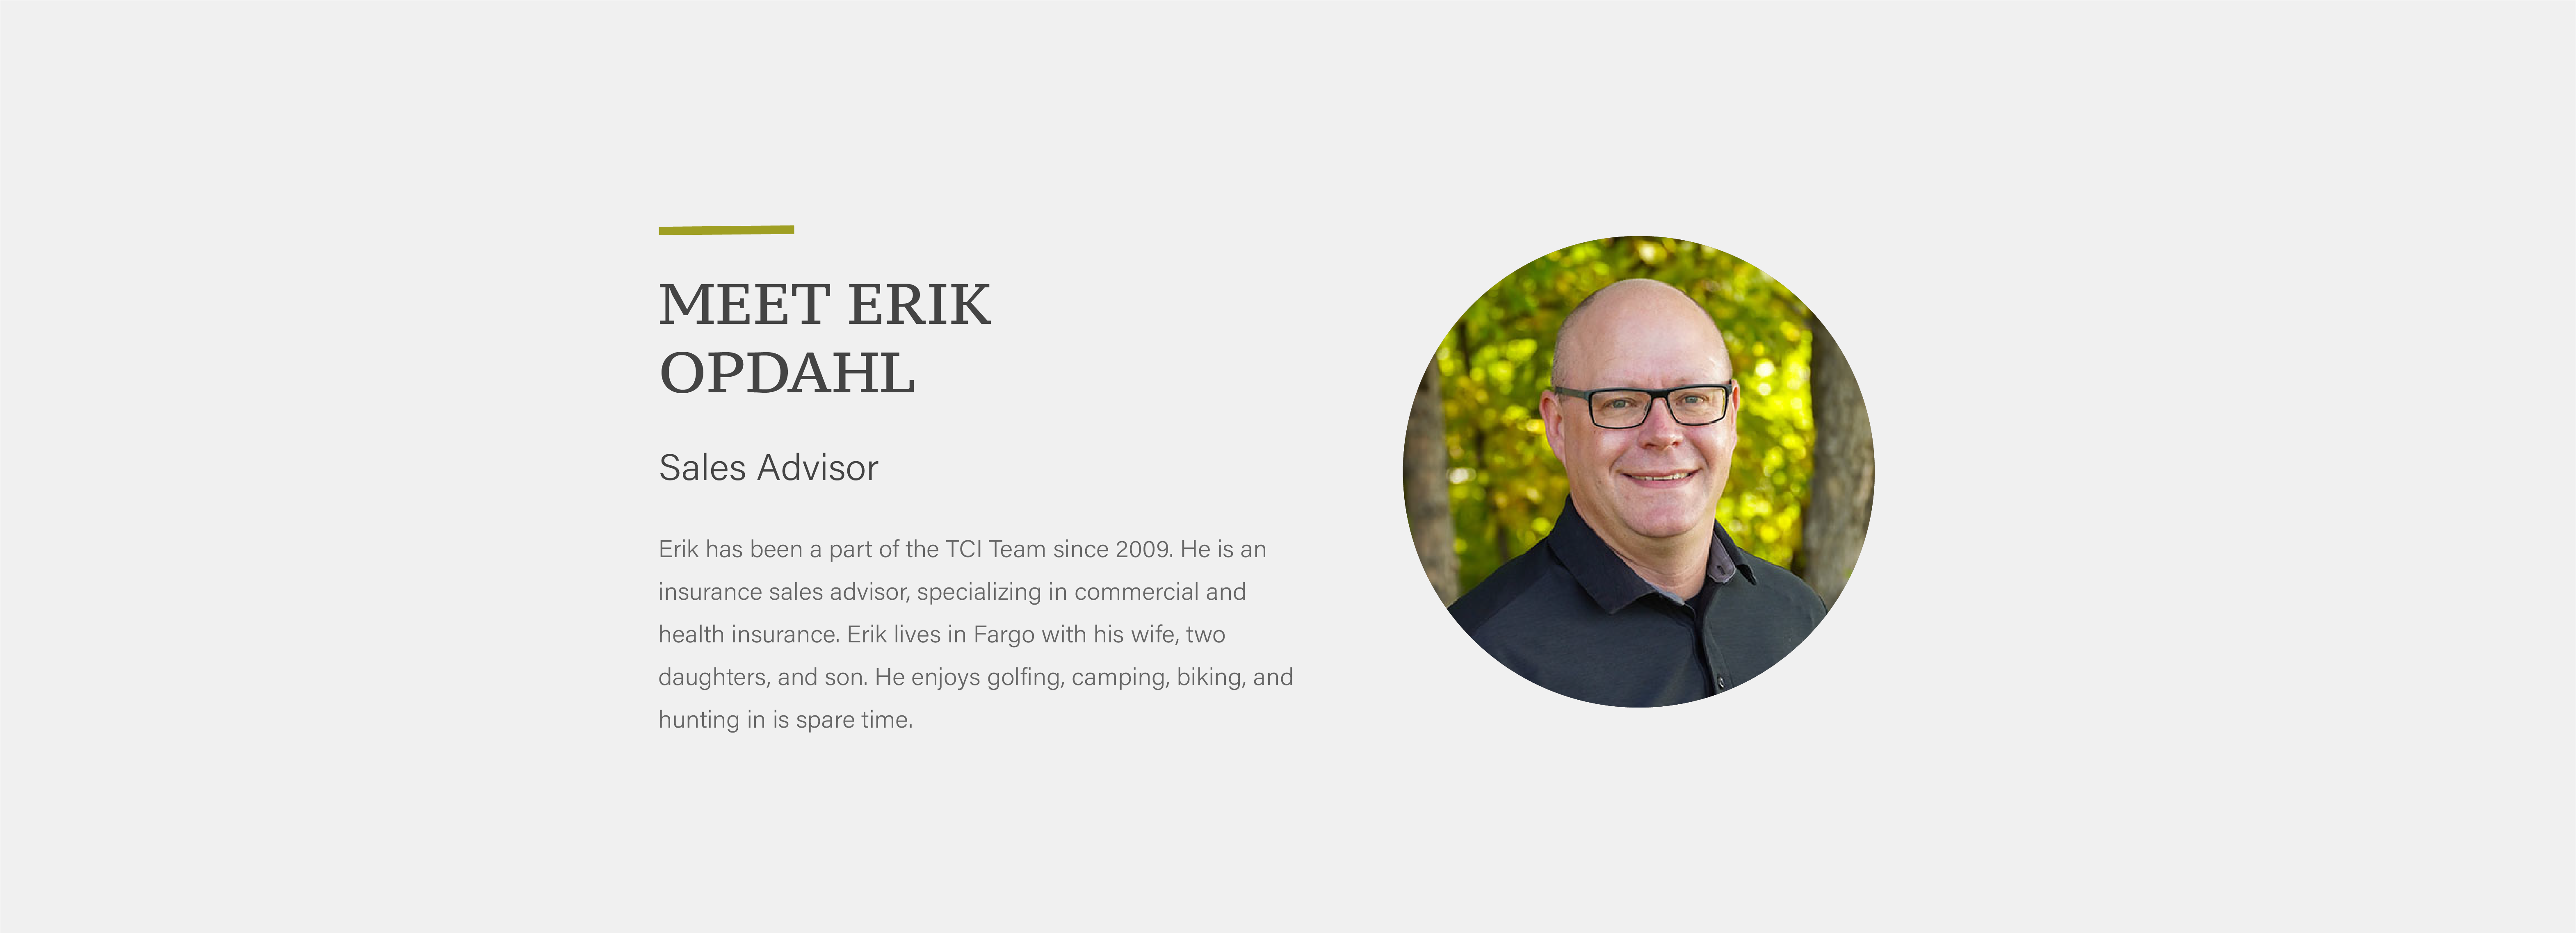 Erik has been a part of the TCI Team since 2009. He is an insurance sales advisor, specializing in commercial and health insurance. Erik lives in Fargo with his wife, two daughters, and son. He enjoys golfing, camping, biking, and hunting in is spare time.